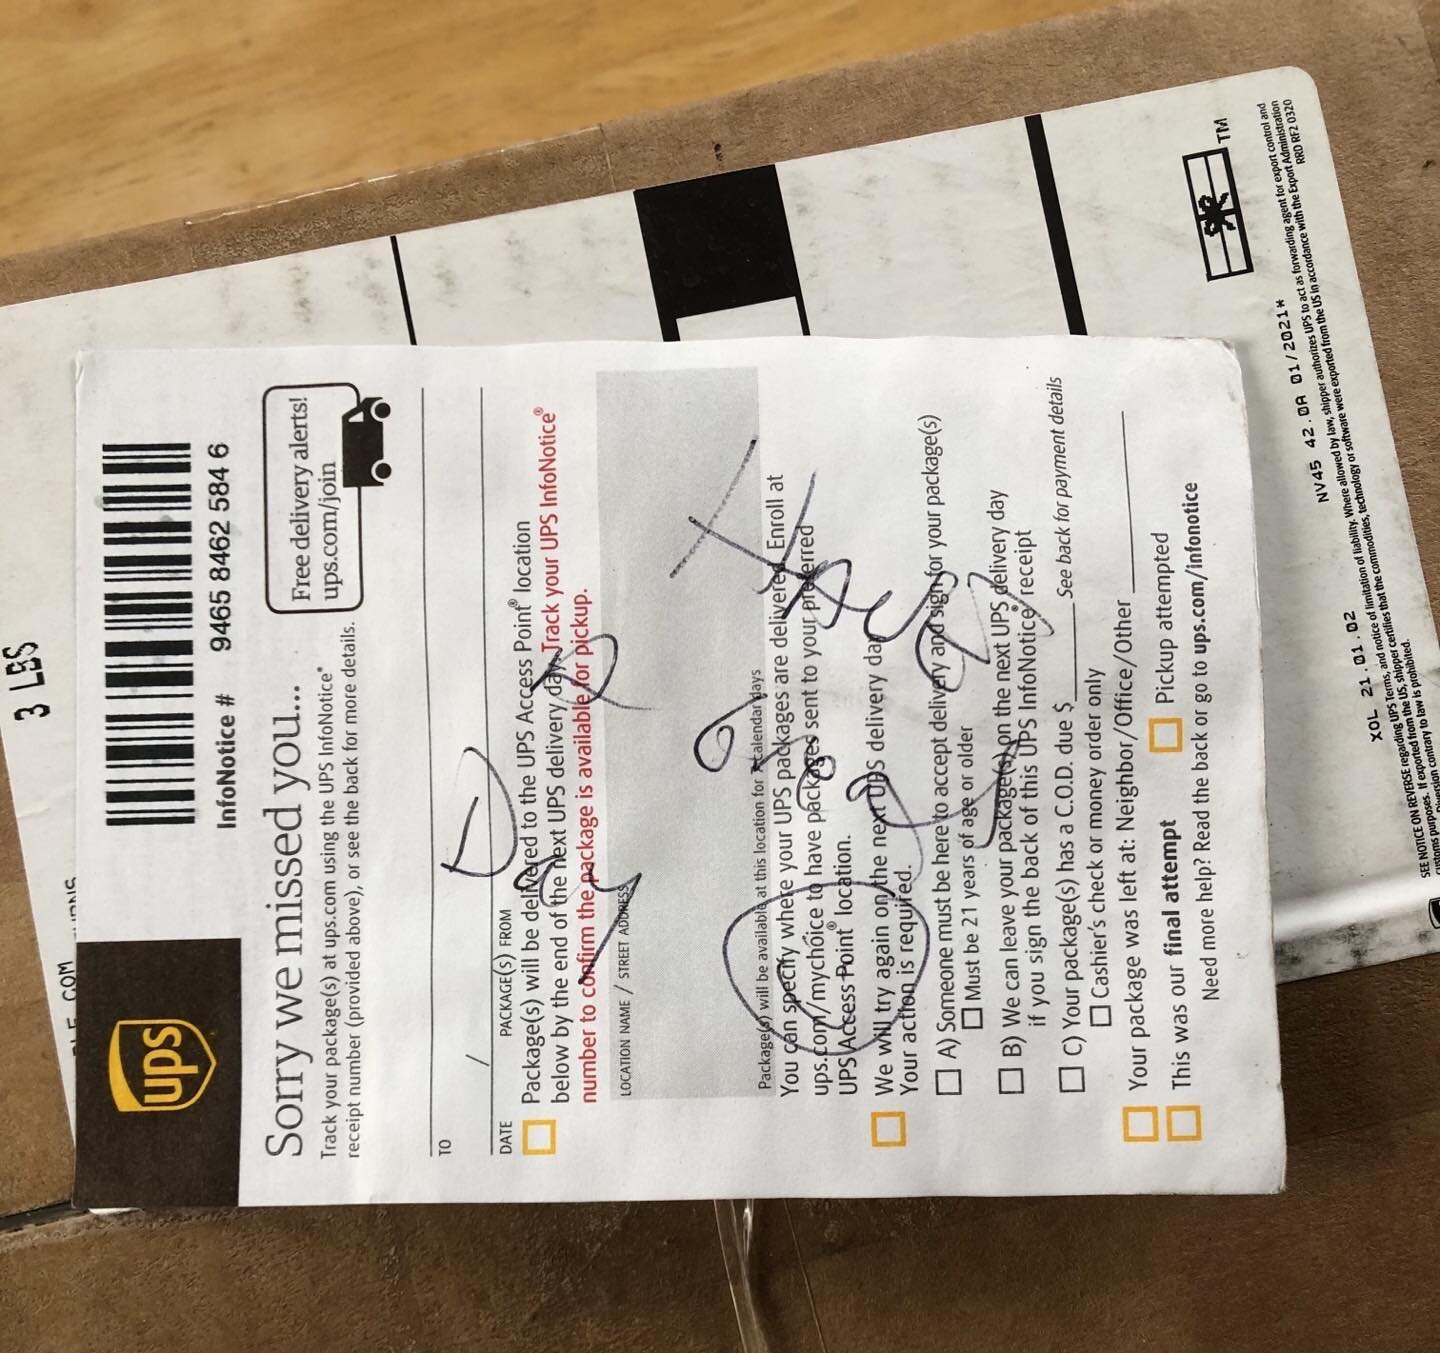 My UPS delivery person is delightful. A great example of caring and spreading joy during challenging times.